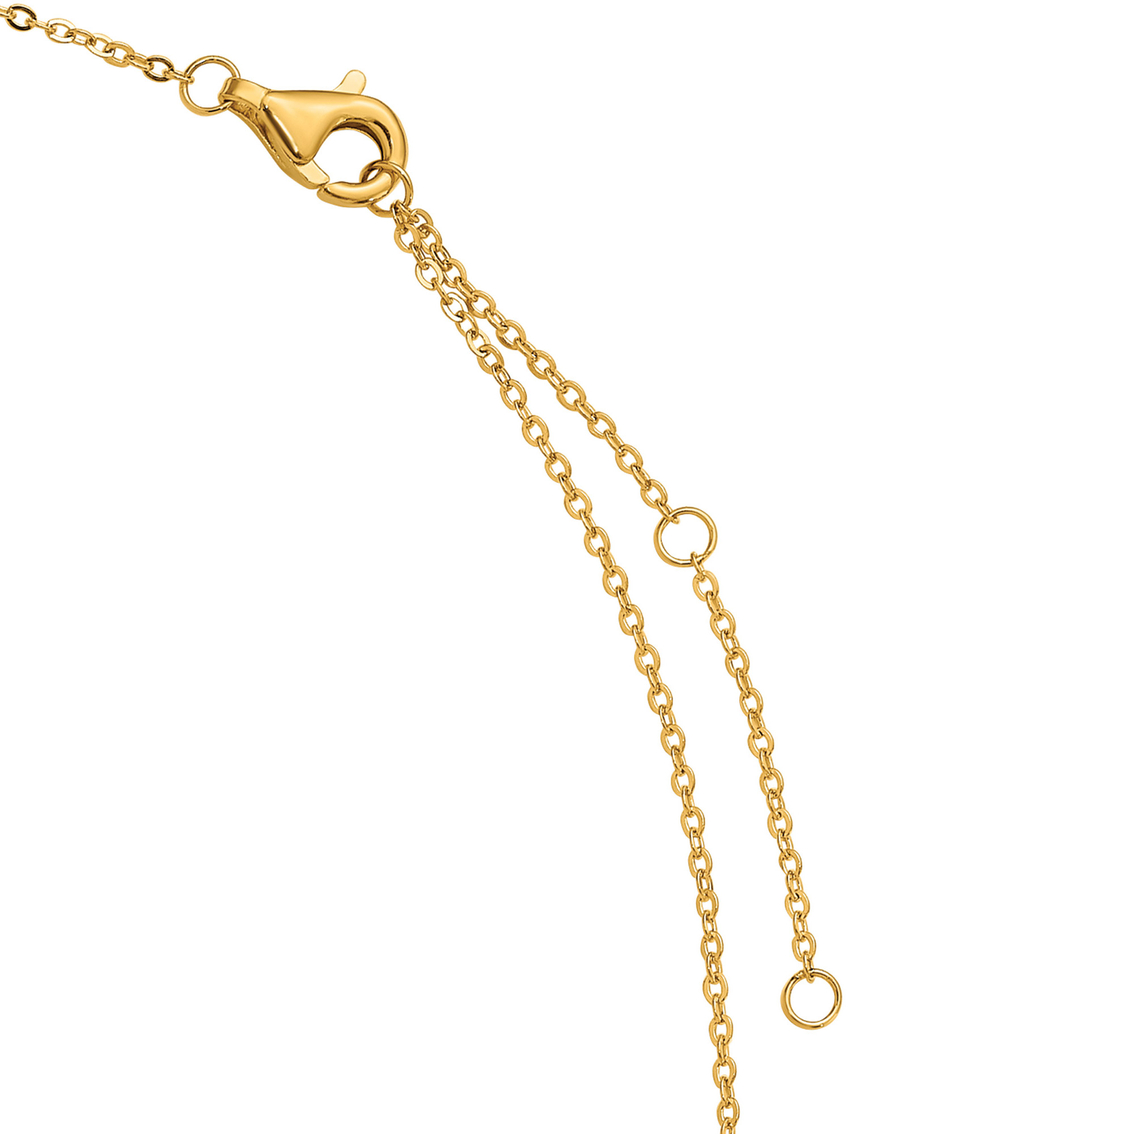 24K Pure Gold 20 in. Fashion Cross Pendant Necklace - Image 6 of 7